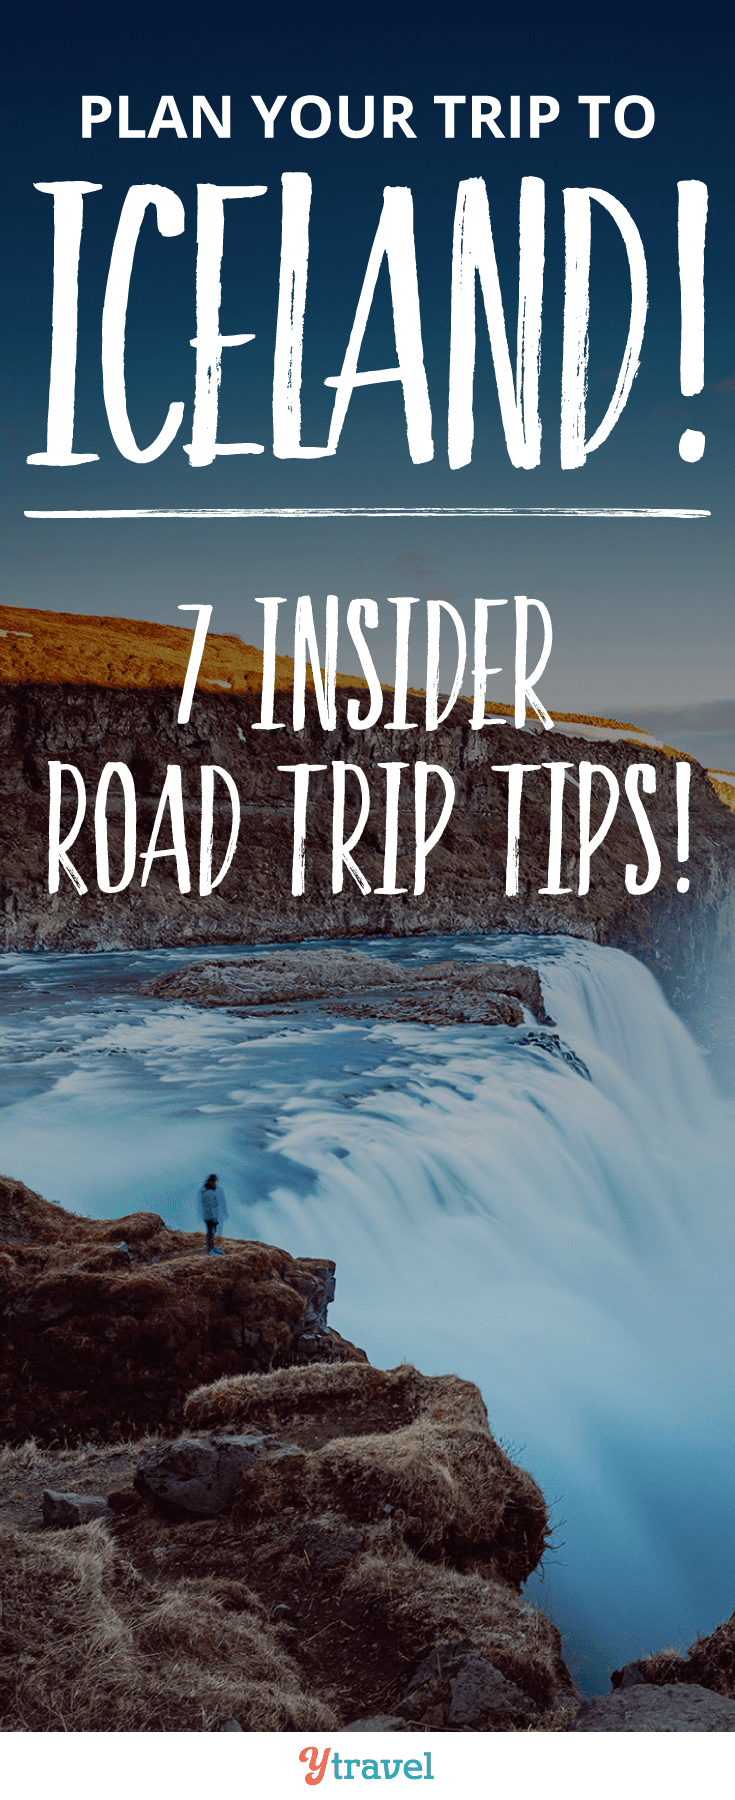 road trip tips for iceland